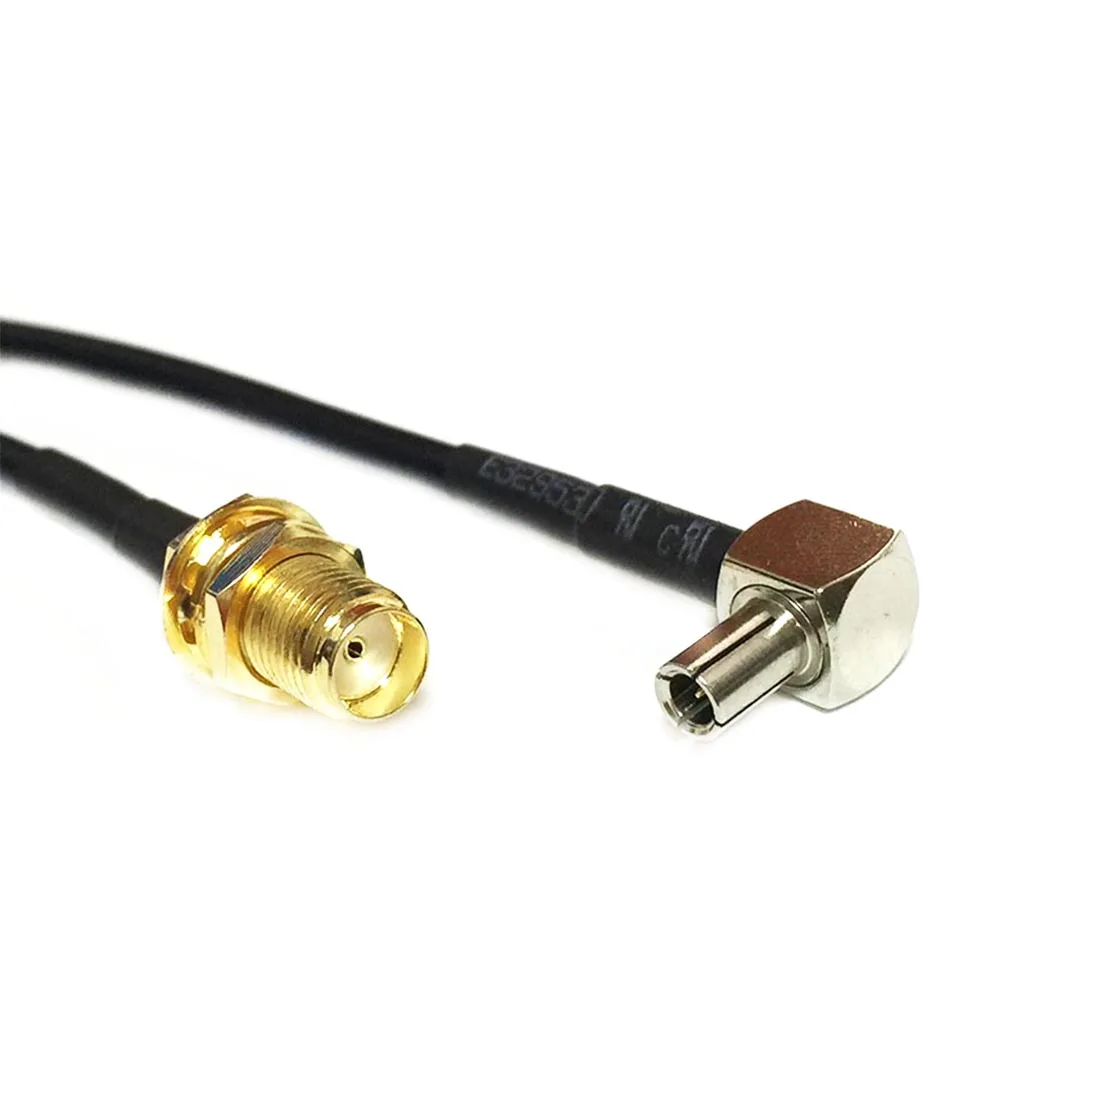 

3G Antenna Cable SMA Female Jack Nut Switch TS9 Right Angle RG174 Cable 20cm 8" Wholesale Fast Ship New